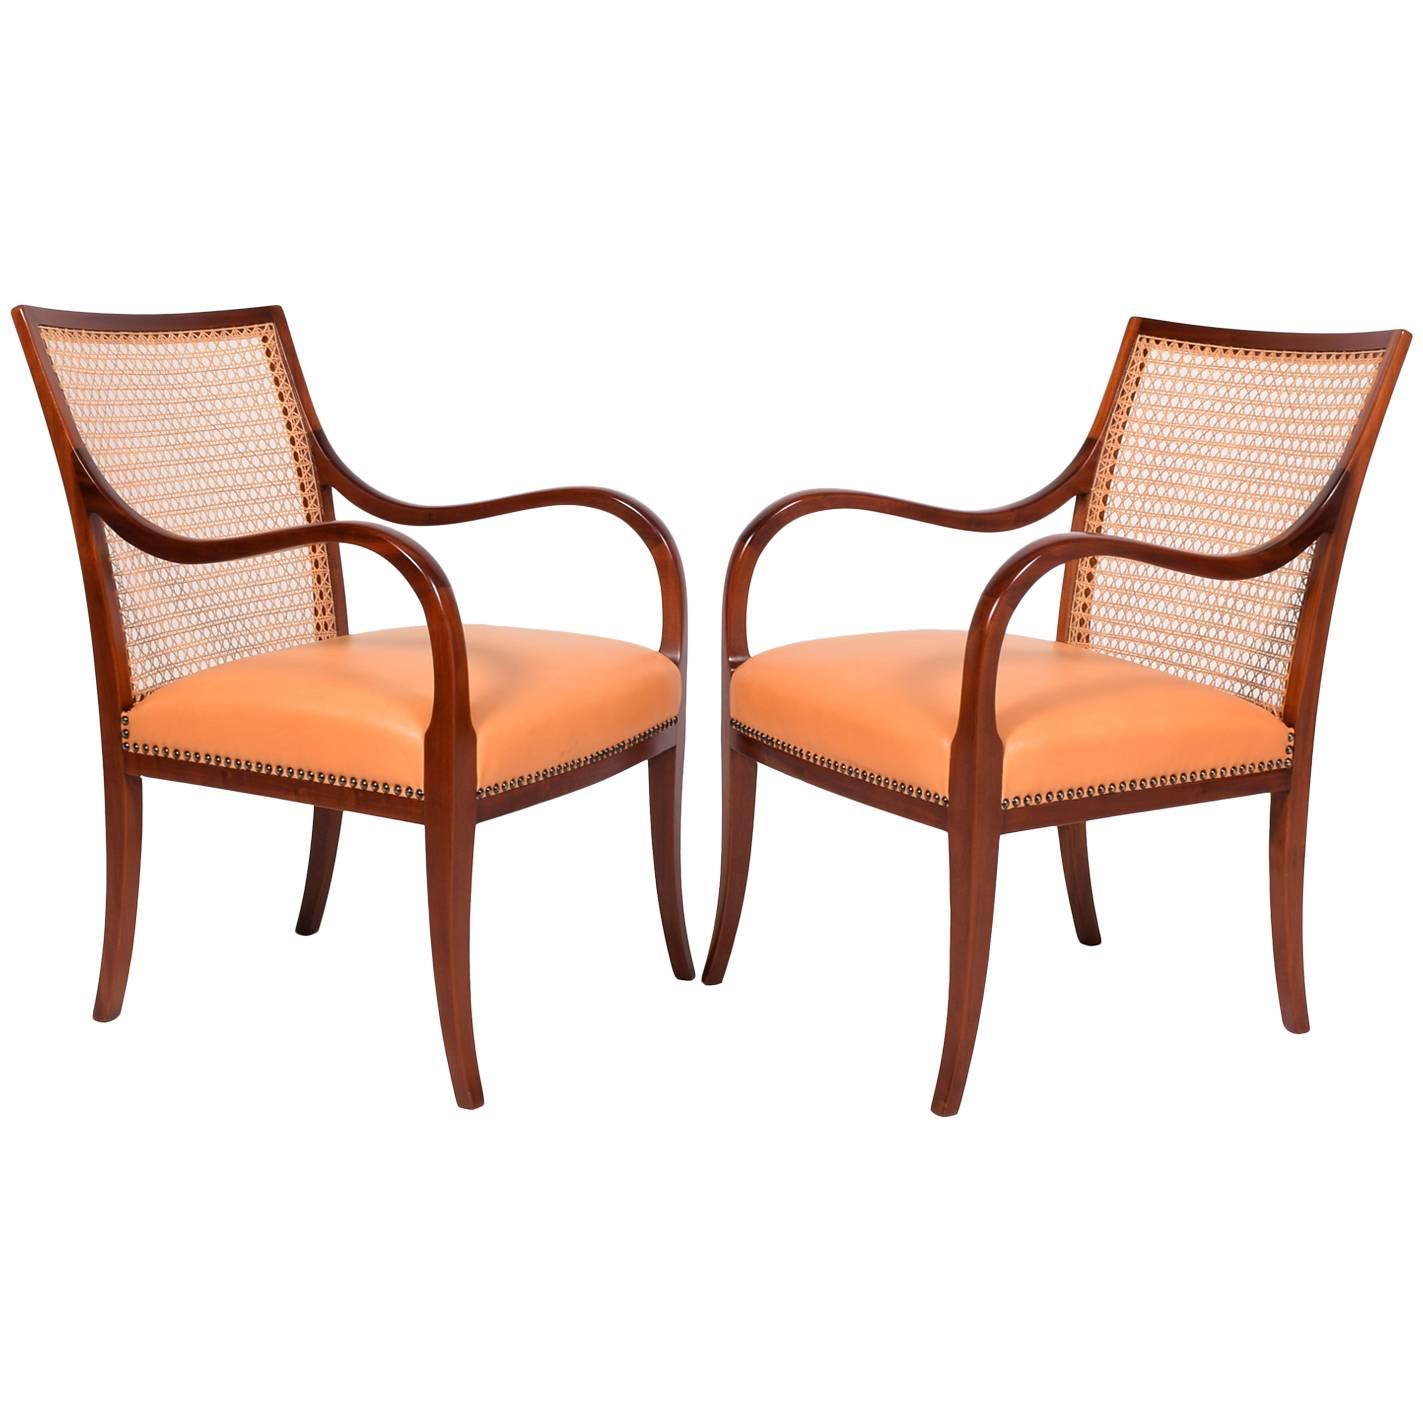 Pair of Armchairs by Frits Henningsen